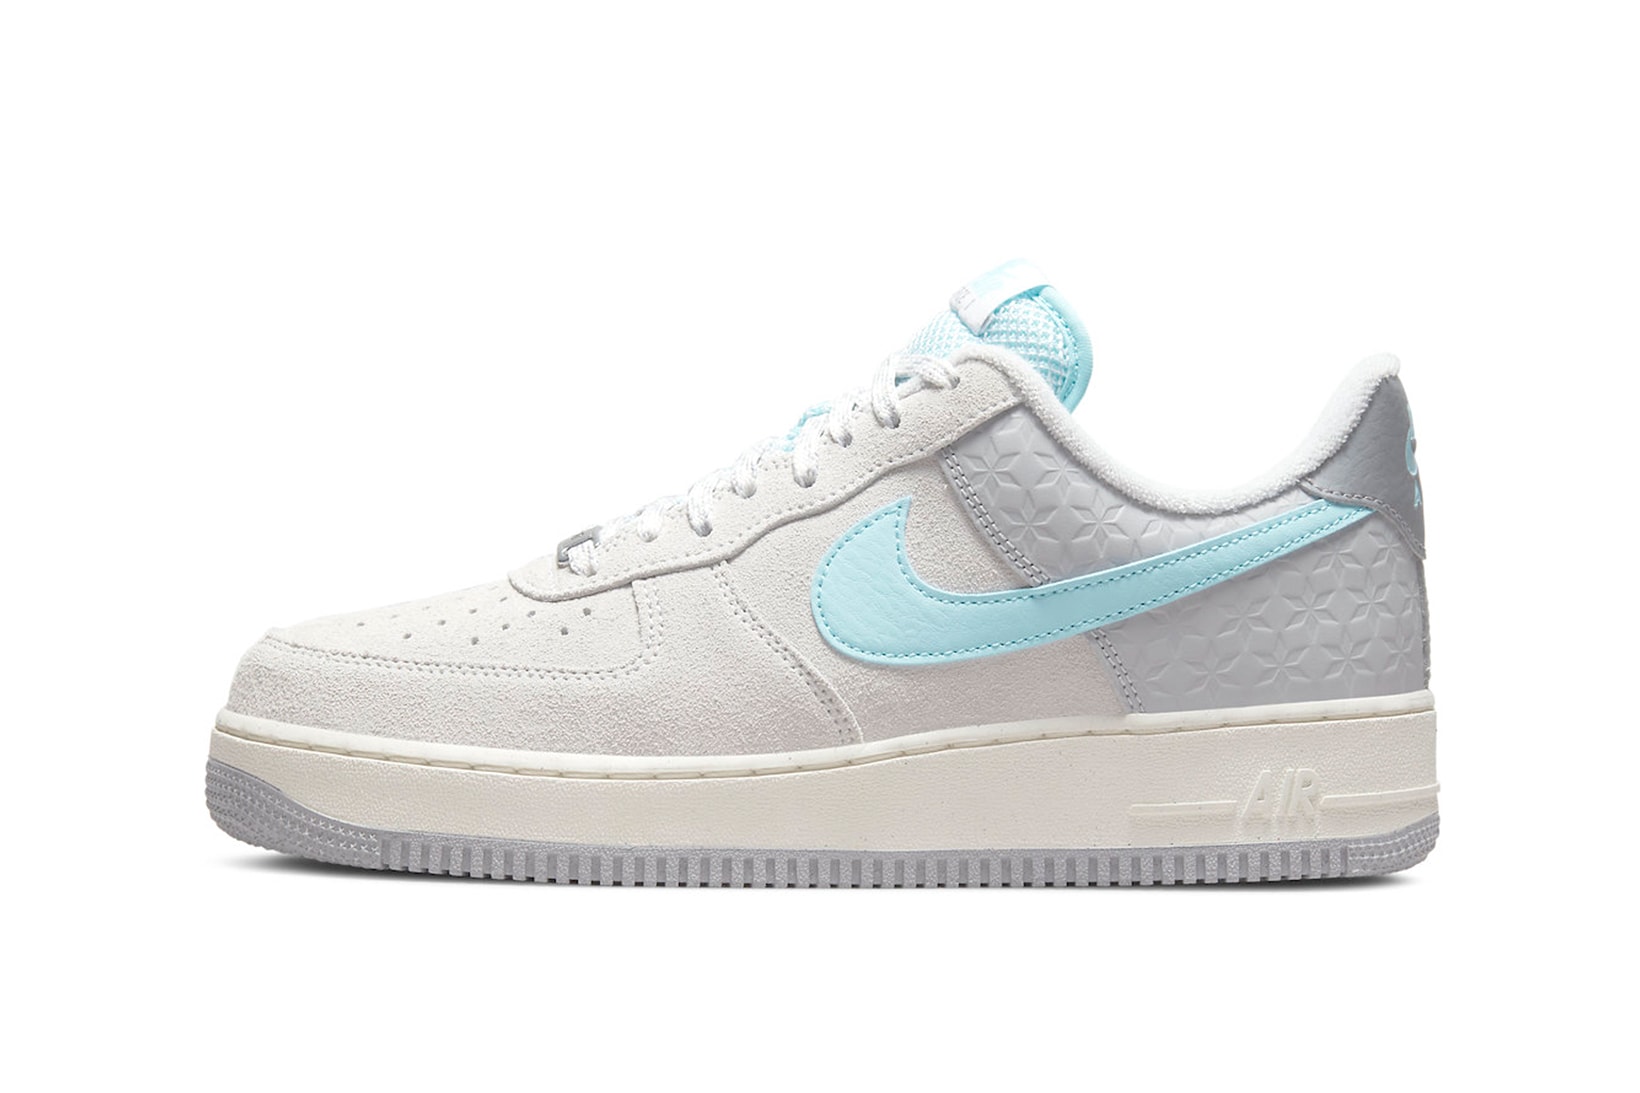 Nike Air Force 1 Low "Snowflake" Sneakers Blue White Gray Medial View